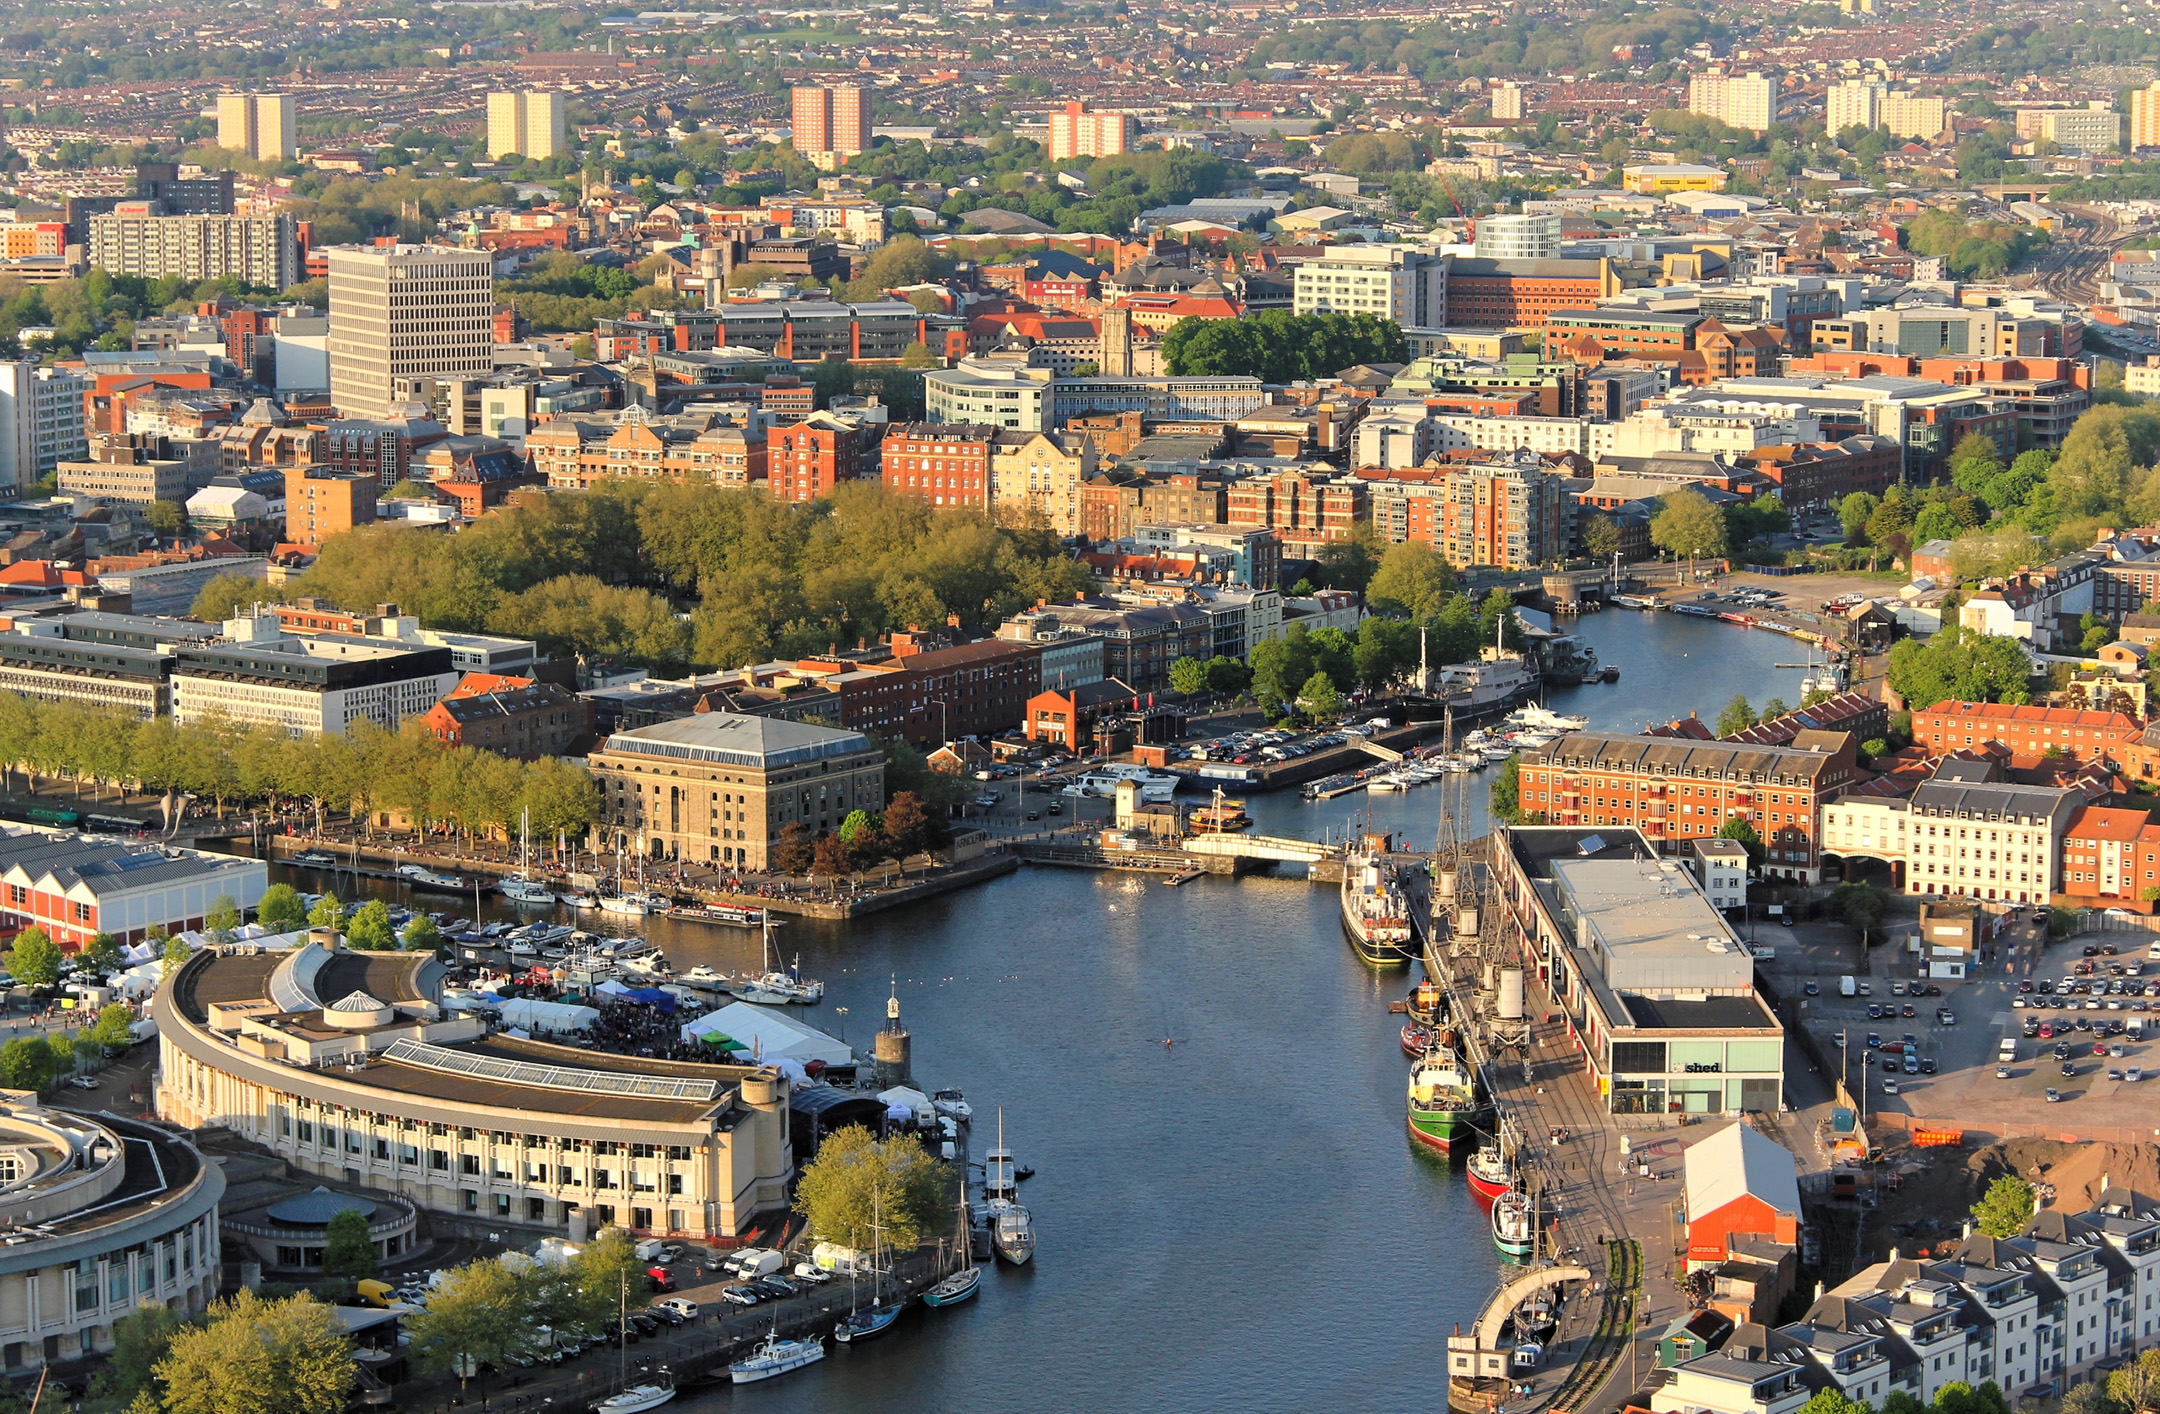 Aerial view of the bustling harbor city of Bristol, featuring a river that winds through the center, lined with boats, buildings, and lush green trees. Numerous buildings, both historical and modern, are visible with high-rise structures scattered throughout the background.